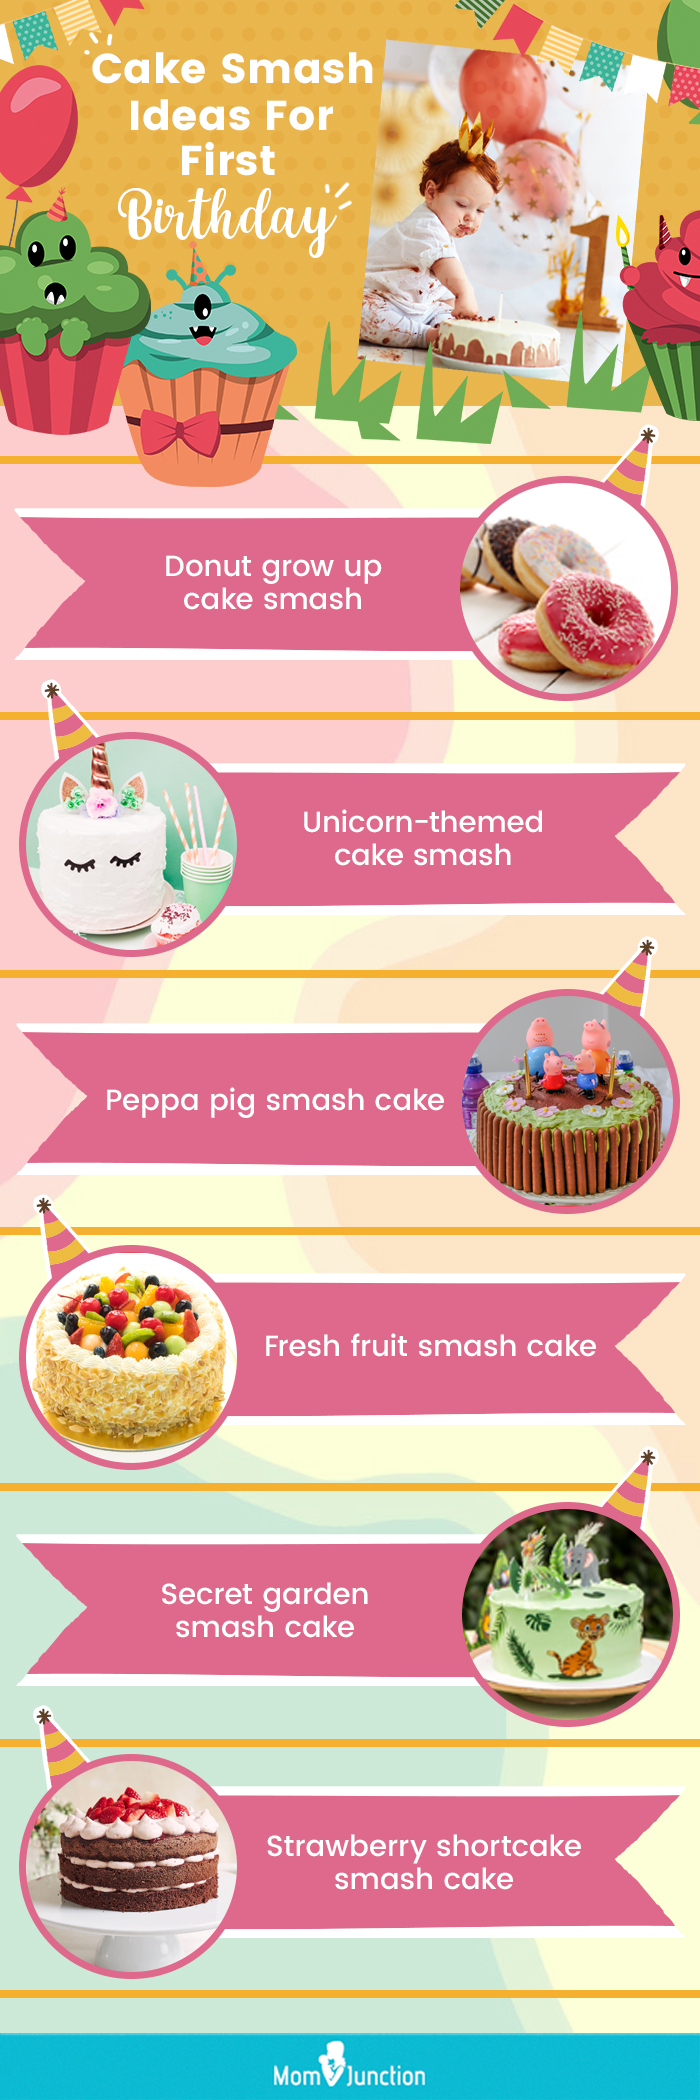 cake smash ideas for first birthday (infographic)